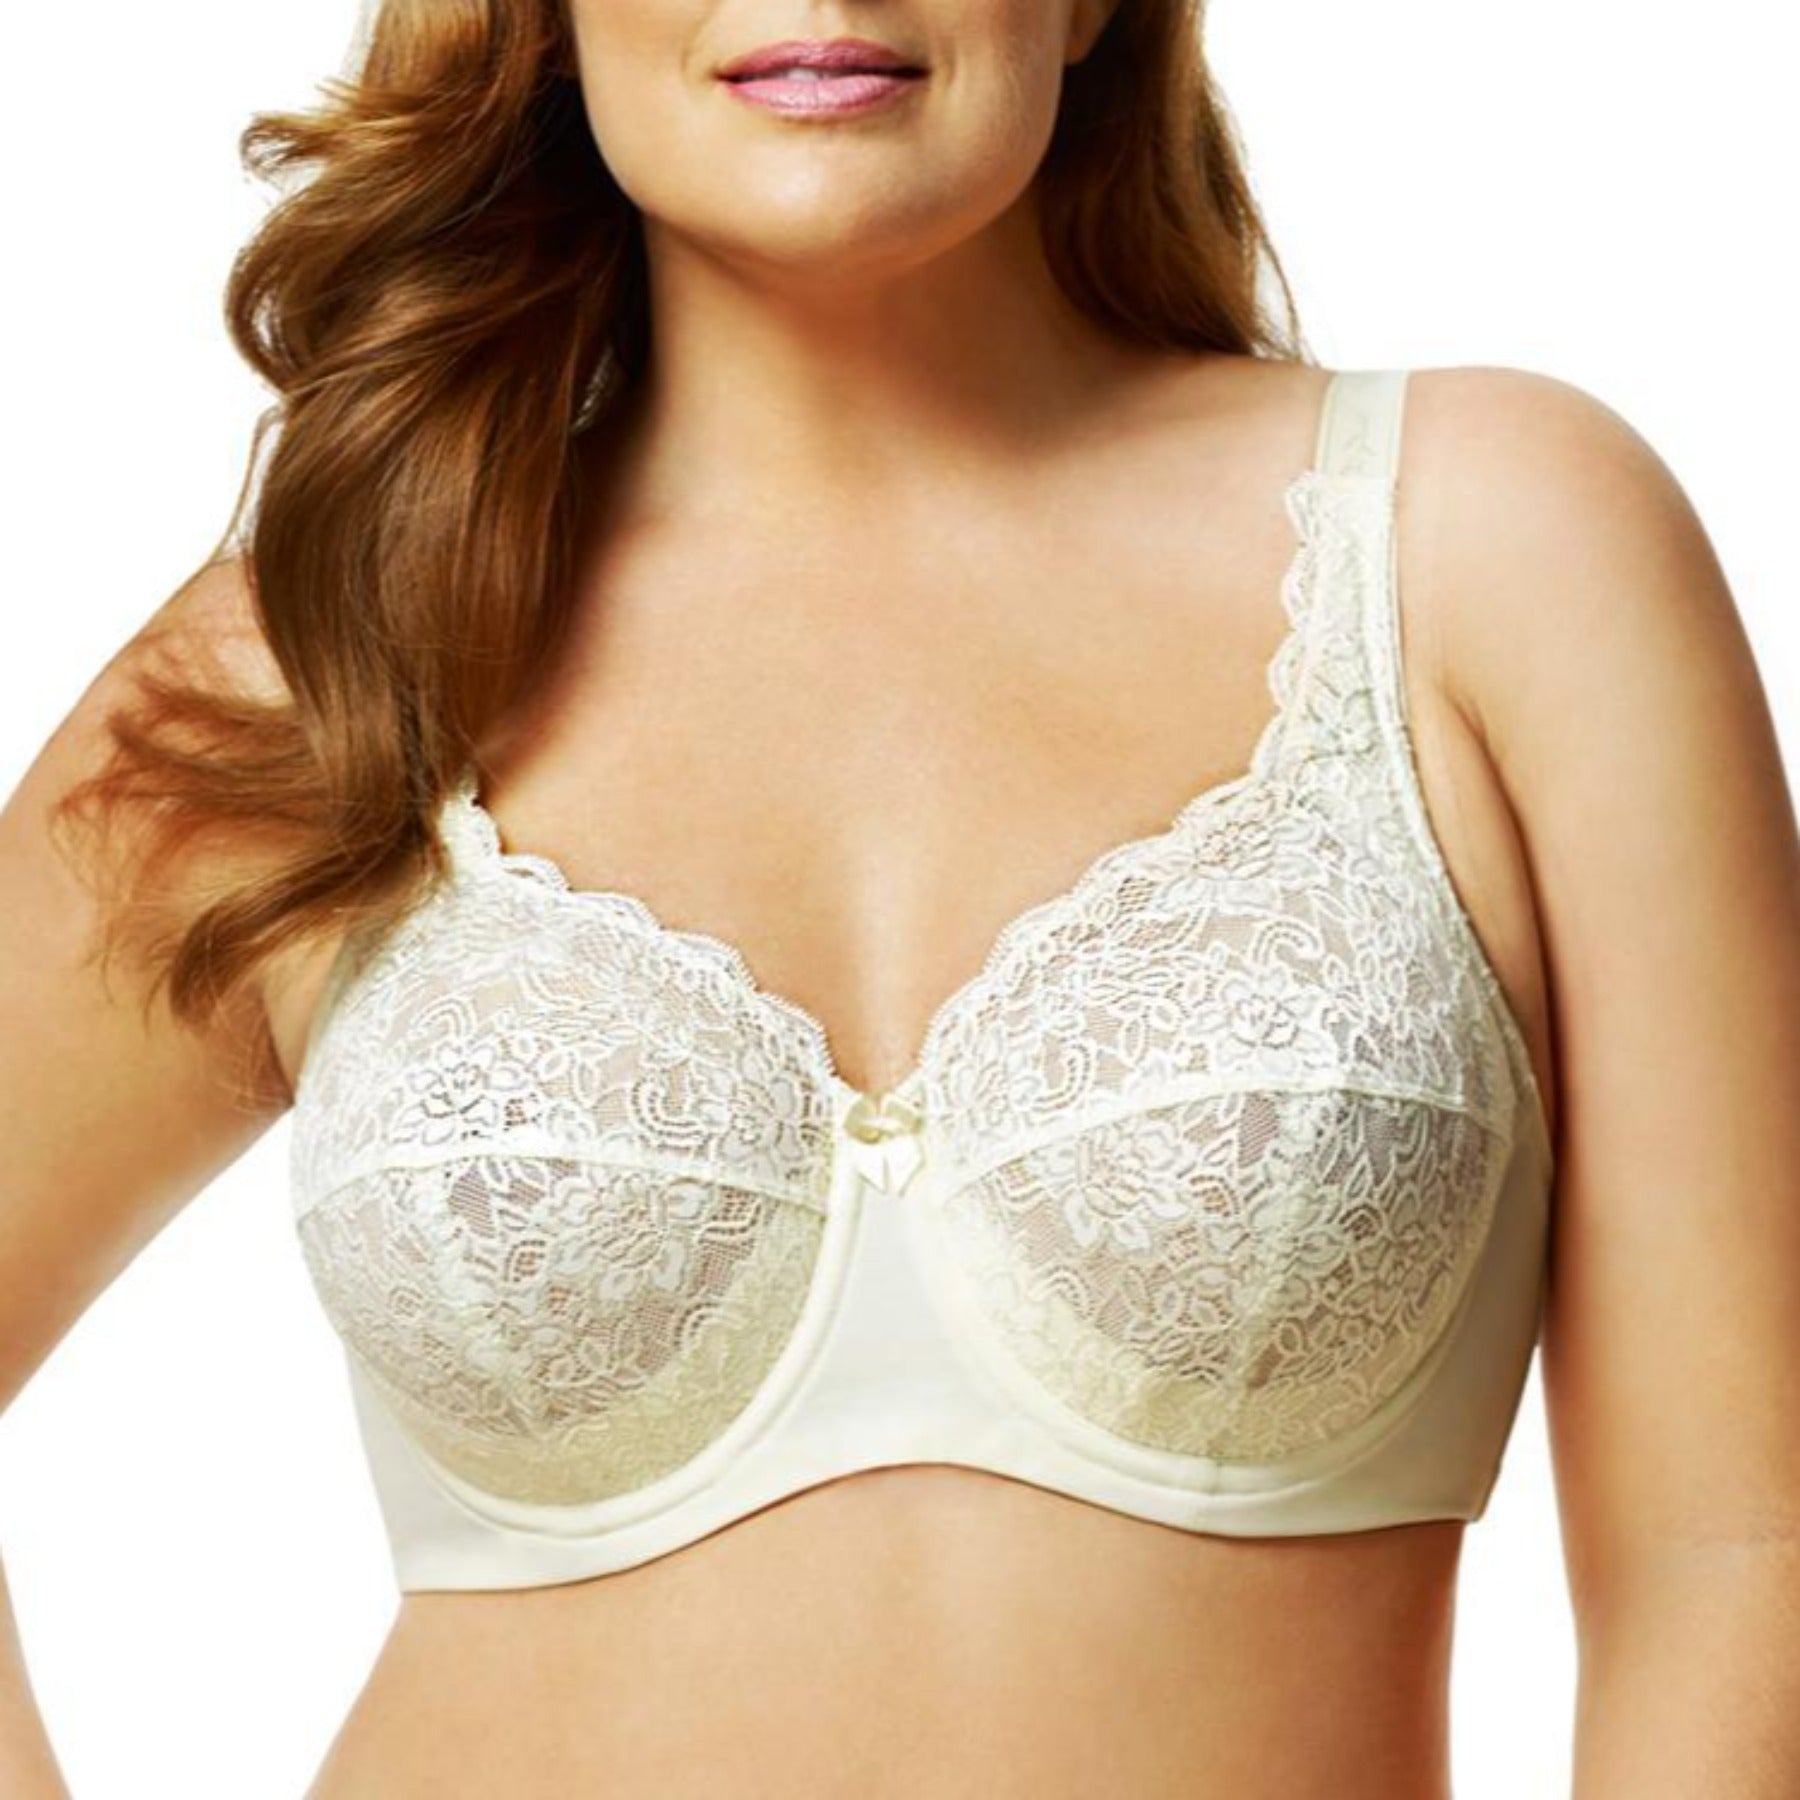 Full Coverage Stretch Lace Underwire Bra 2311 - Ivory